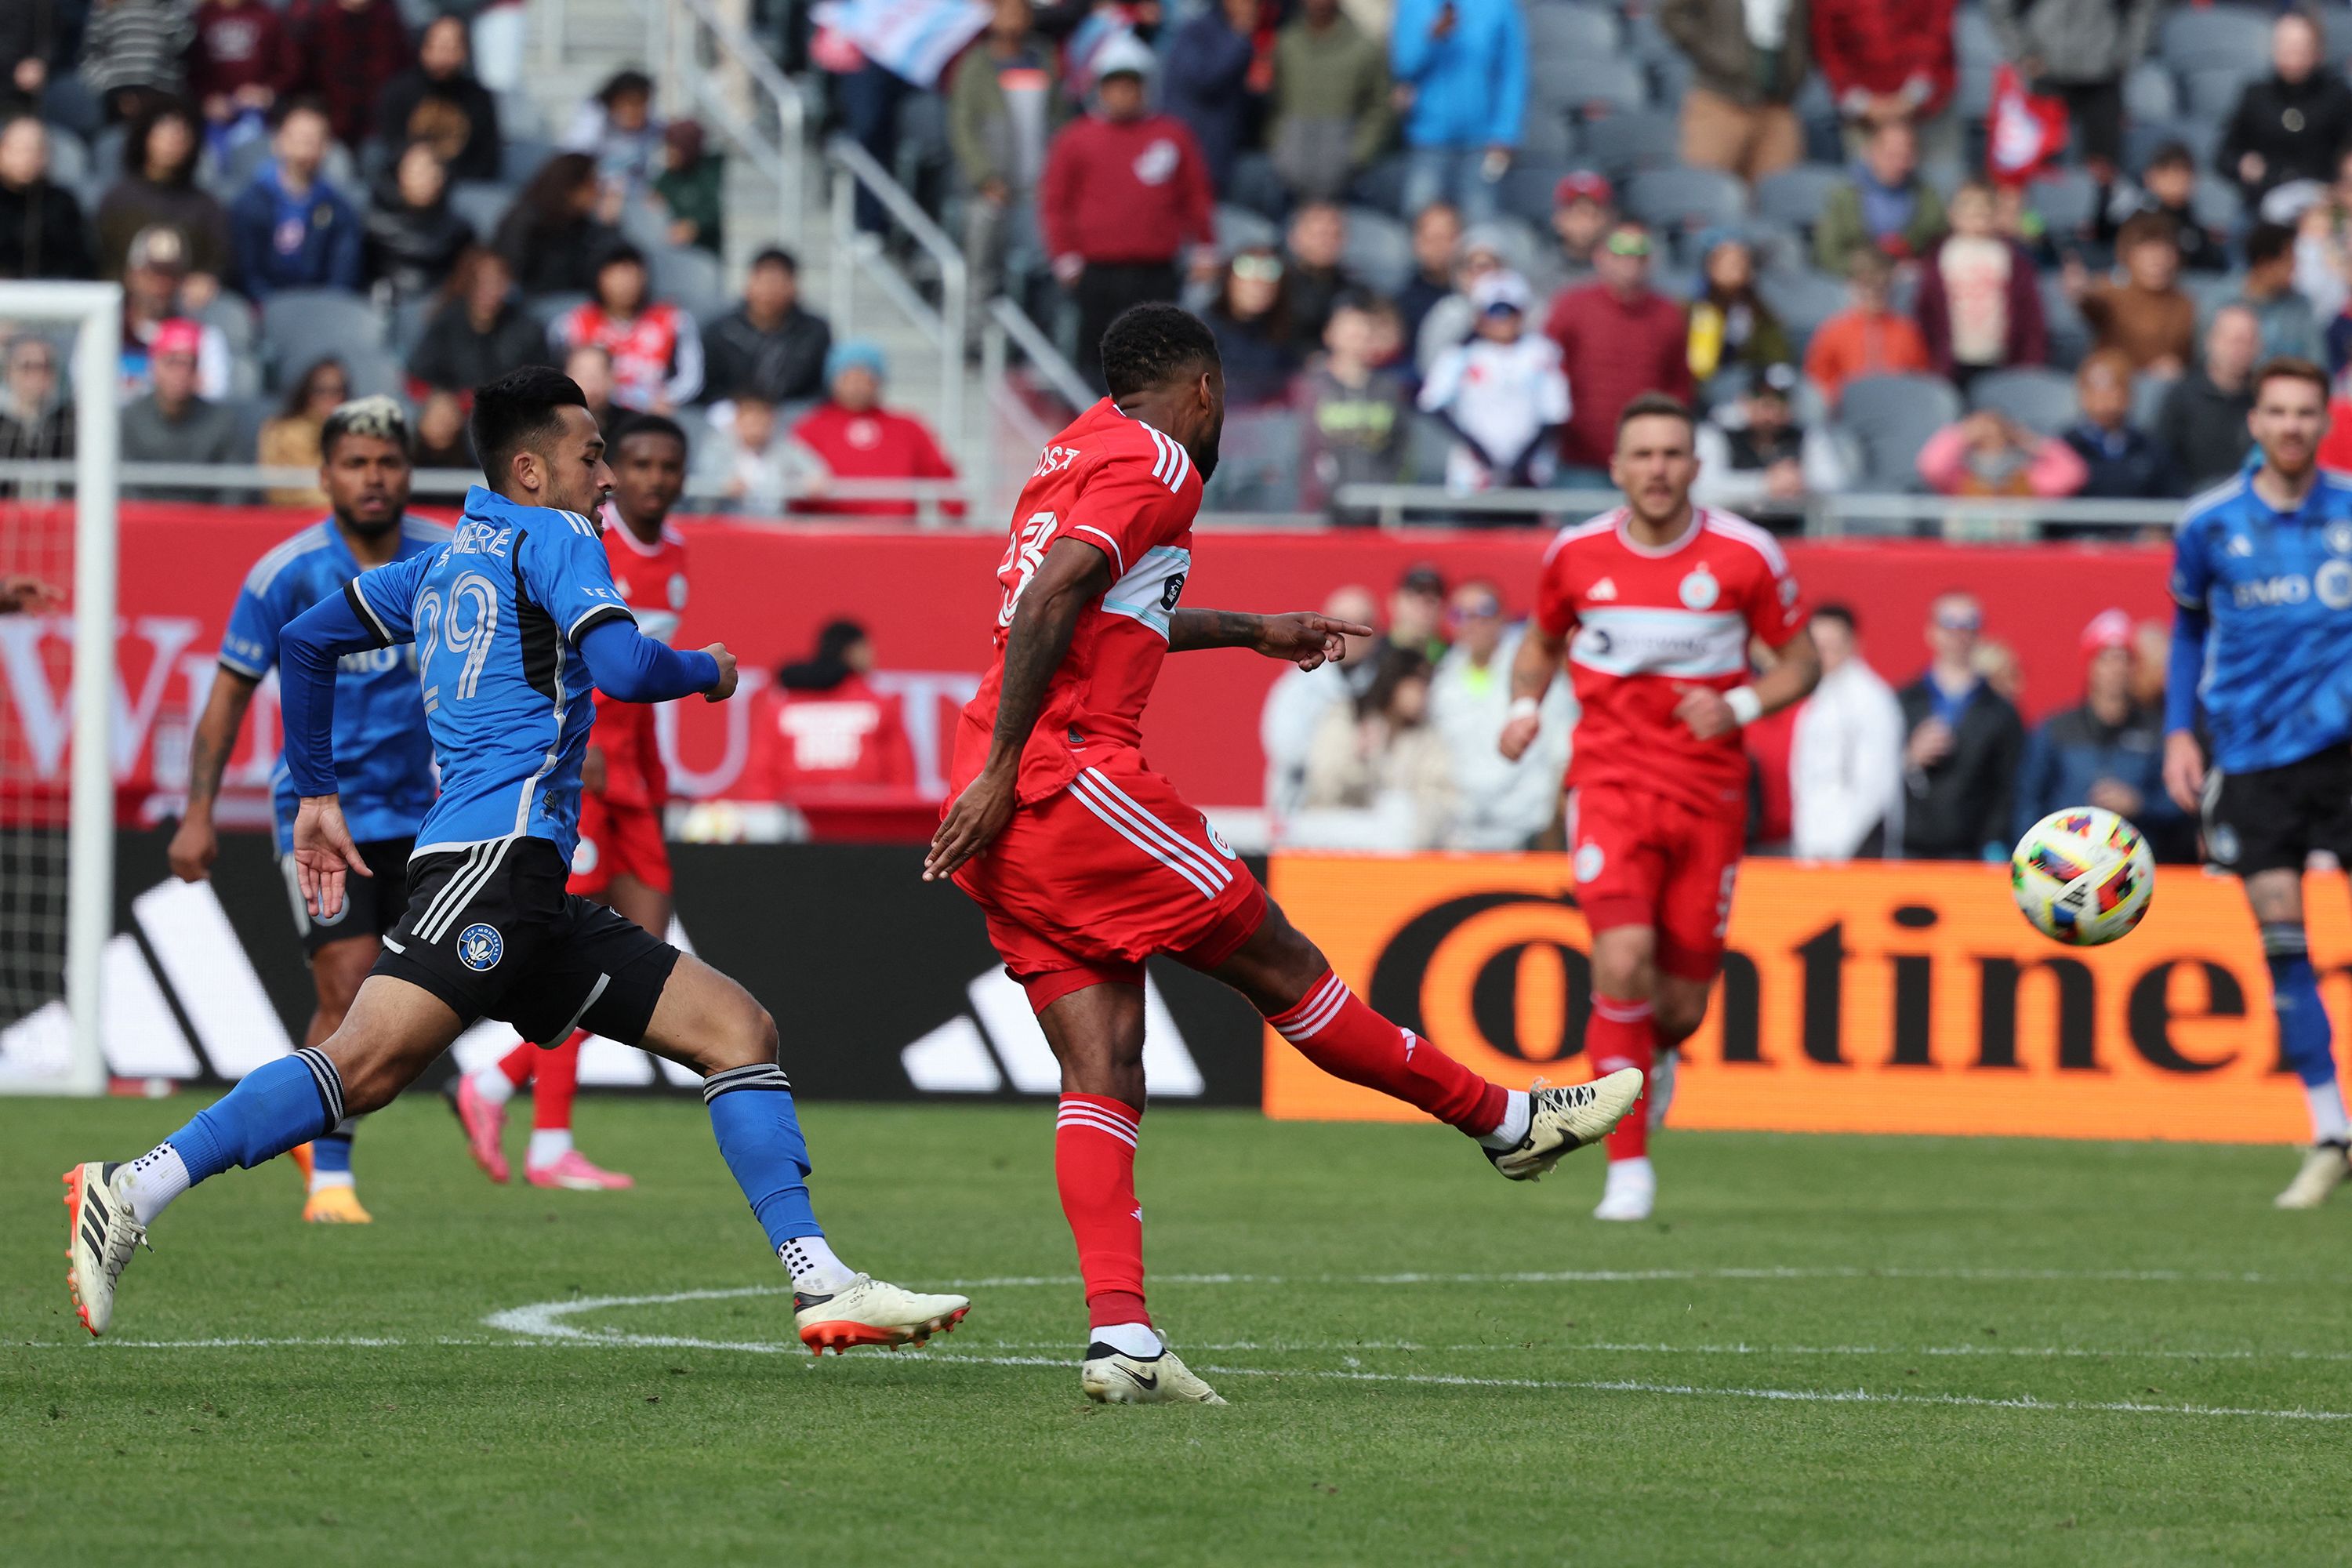 Chicago Fire midfielder Kellyn Acosta scores wild stoppage-time goal from  inside own half to complete improbable comeback win